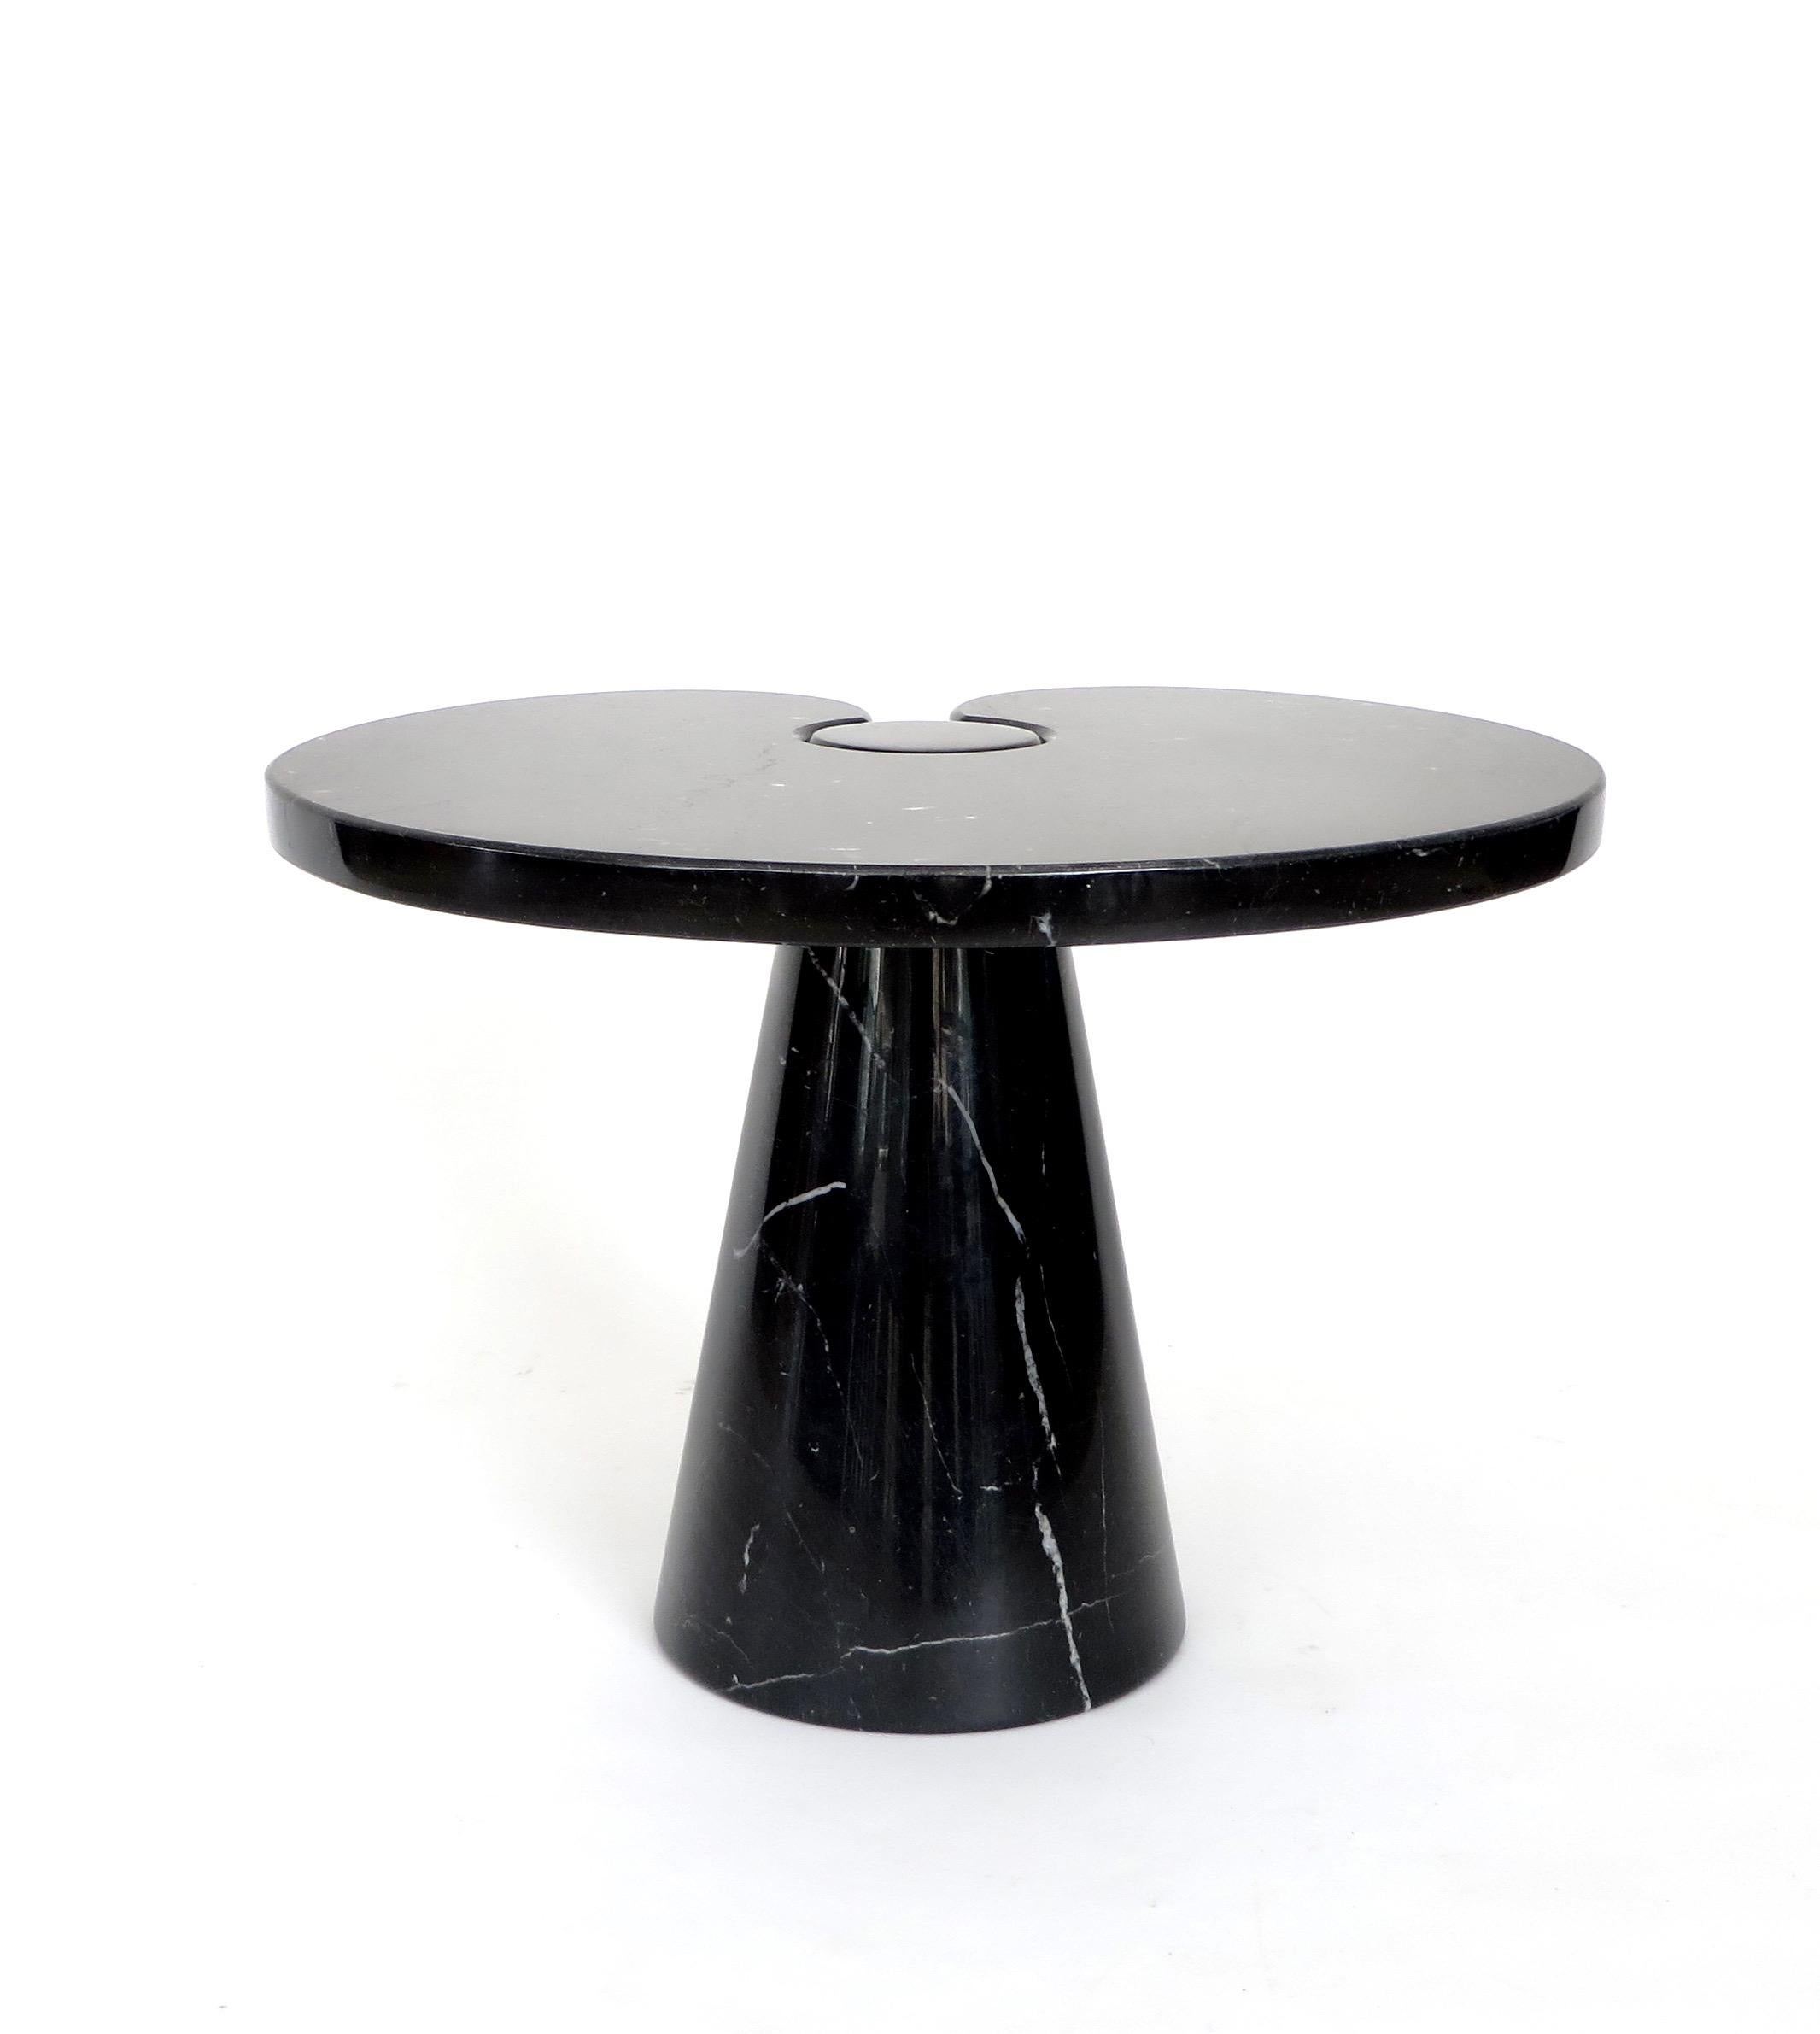 Italian Angelo Mangiarotti vintage low Eros side table in Marquina Nero marble.
Skipper series, 1971.
Beautiful black Mangiarotti table with nice veining, no chips or restorations.
     